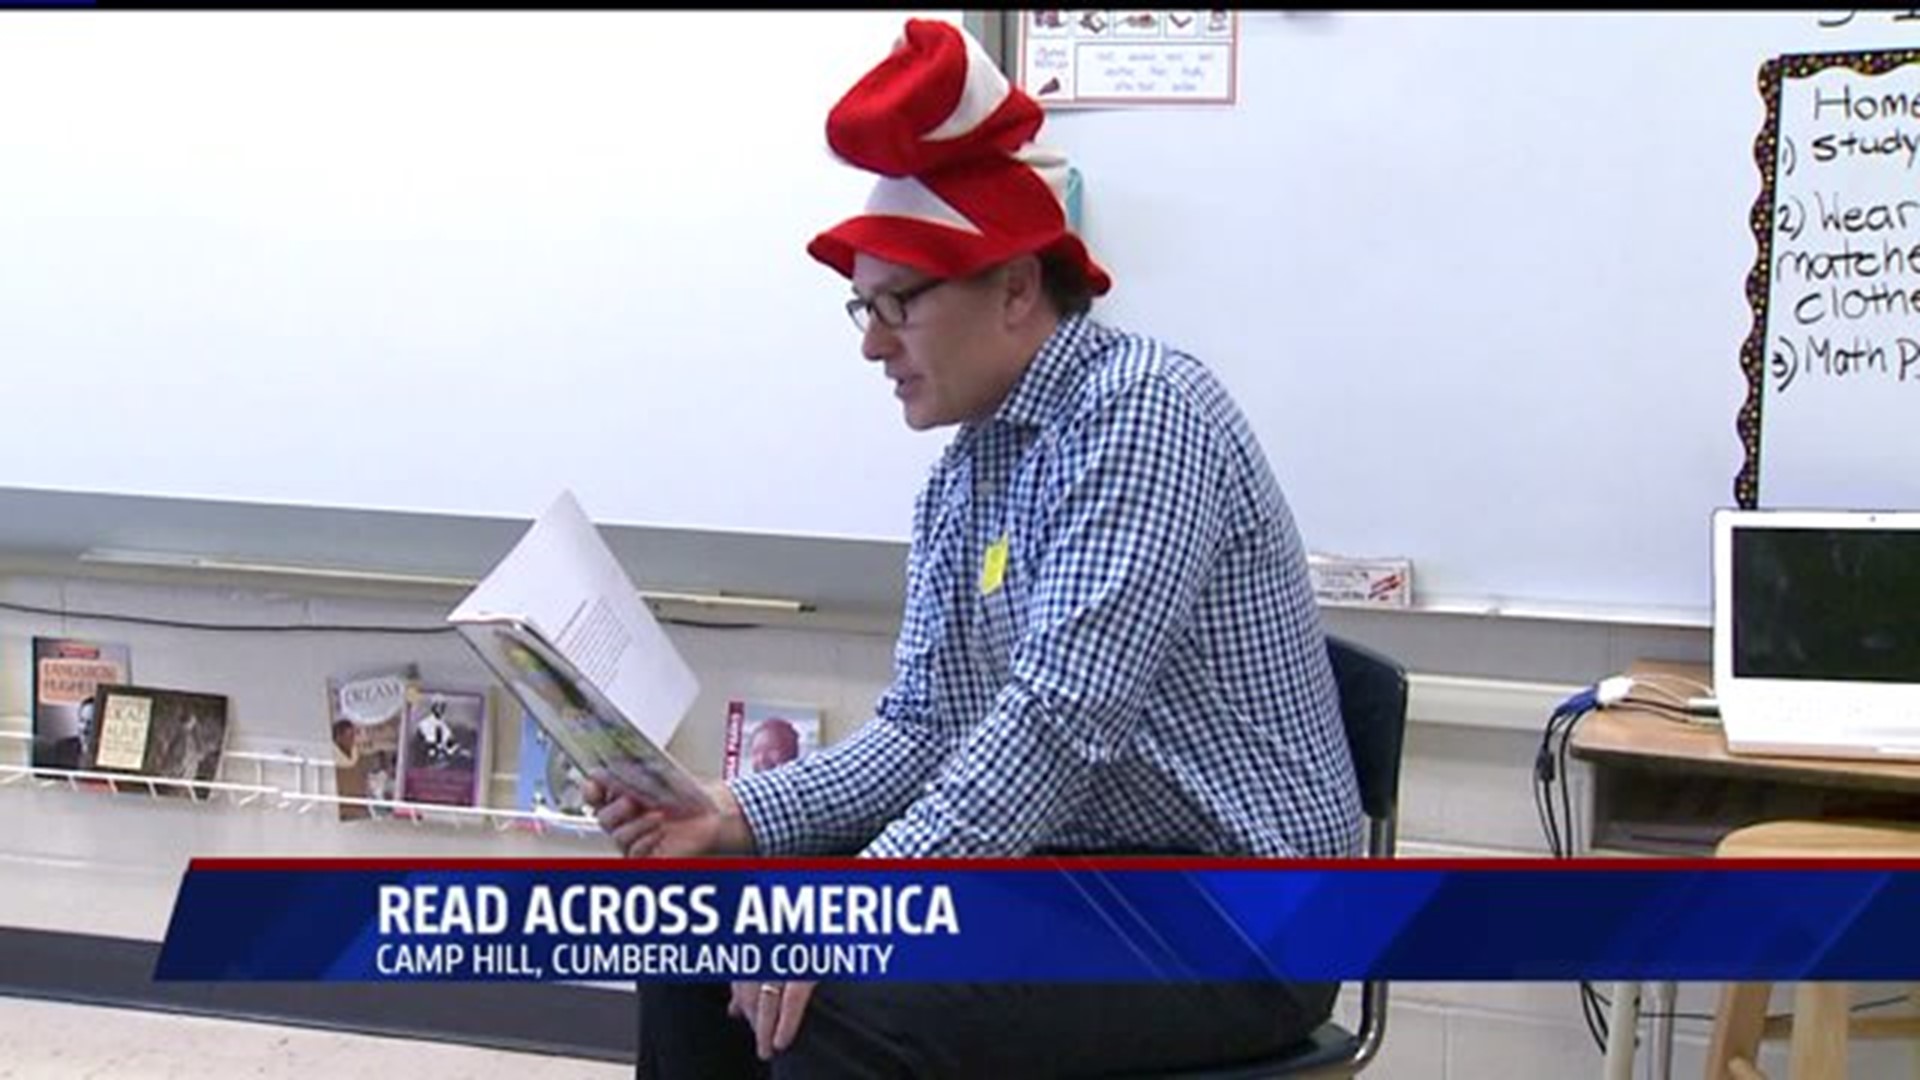 Bill Toth takes part in "Read Across America"